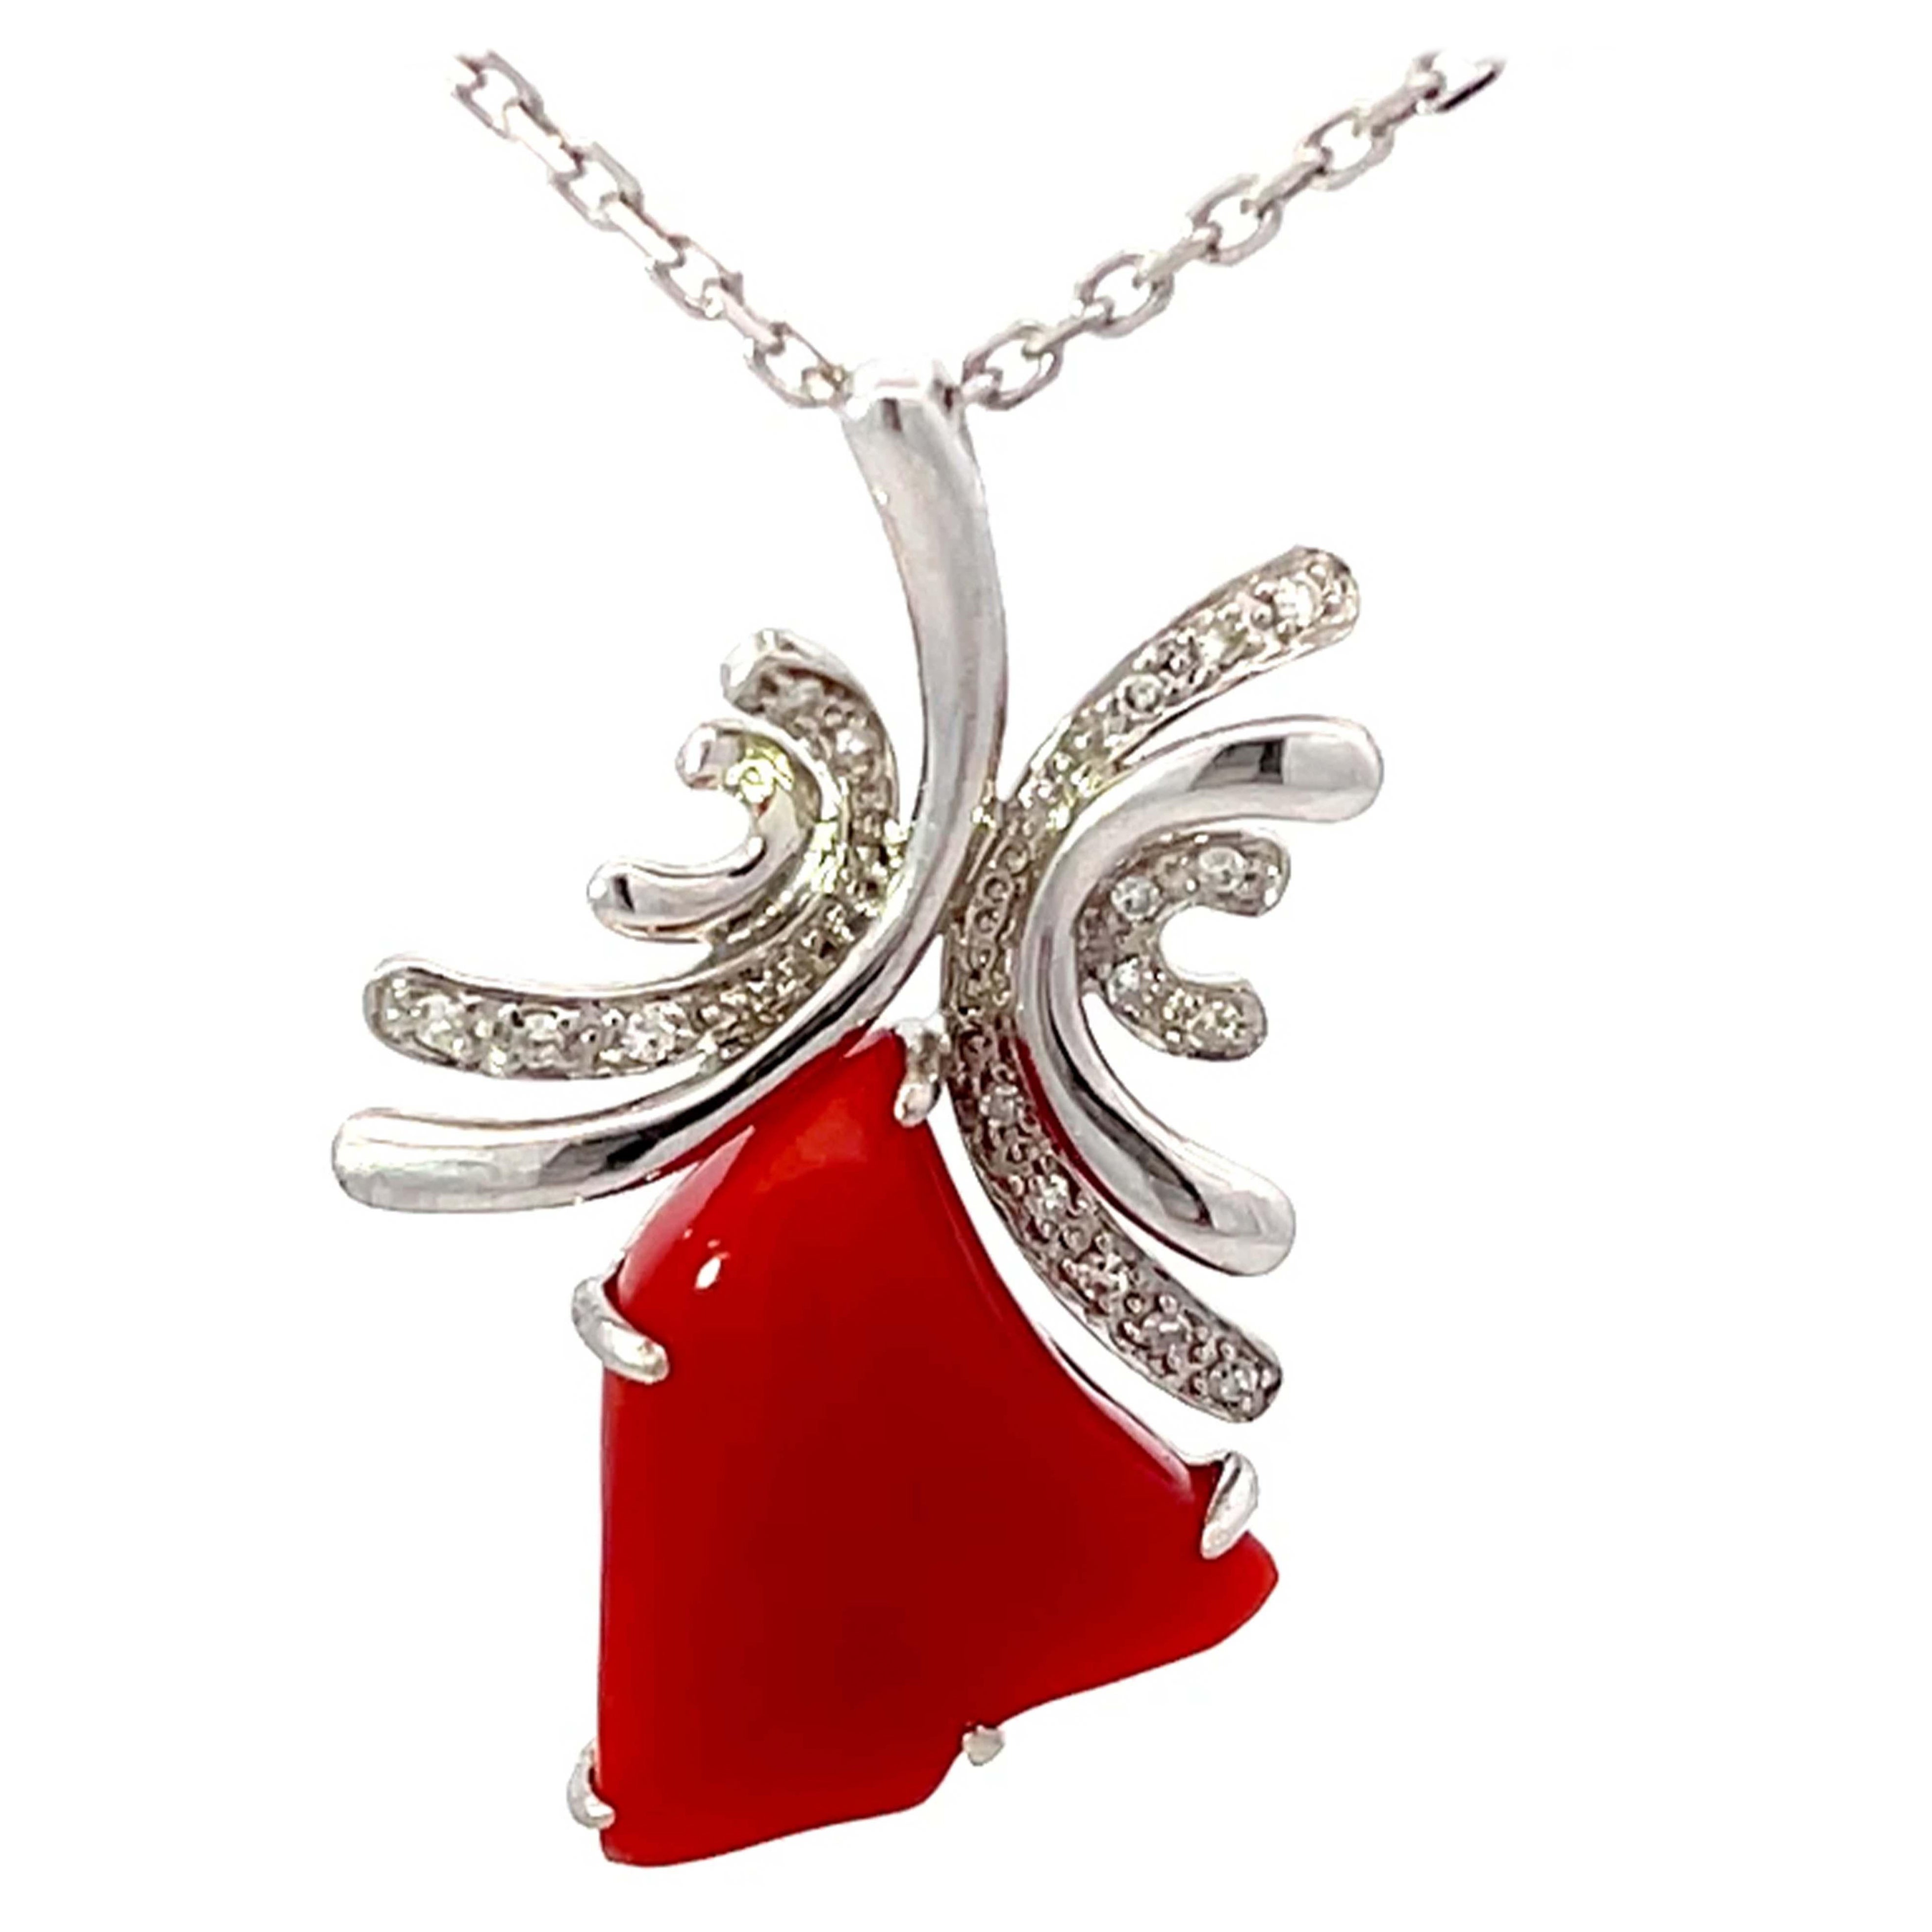 Aka Coral Red Heart Diamond Necklace Solid 14k White Gold For Sale